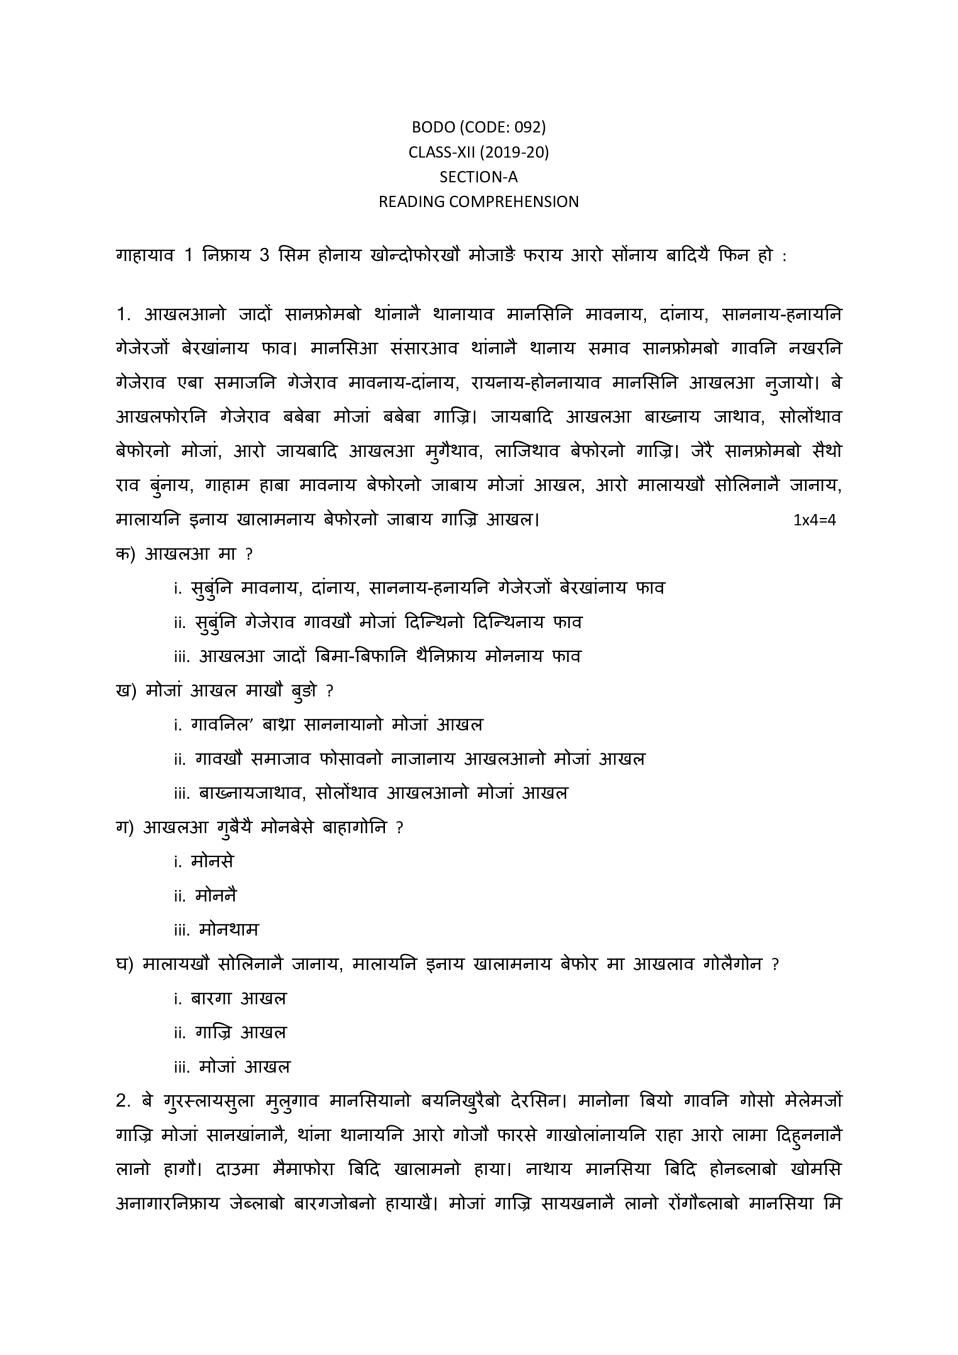 CBSE Class 12 Sample Paper 2020 for Bodo - Page 1